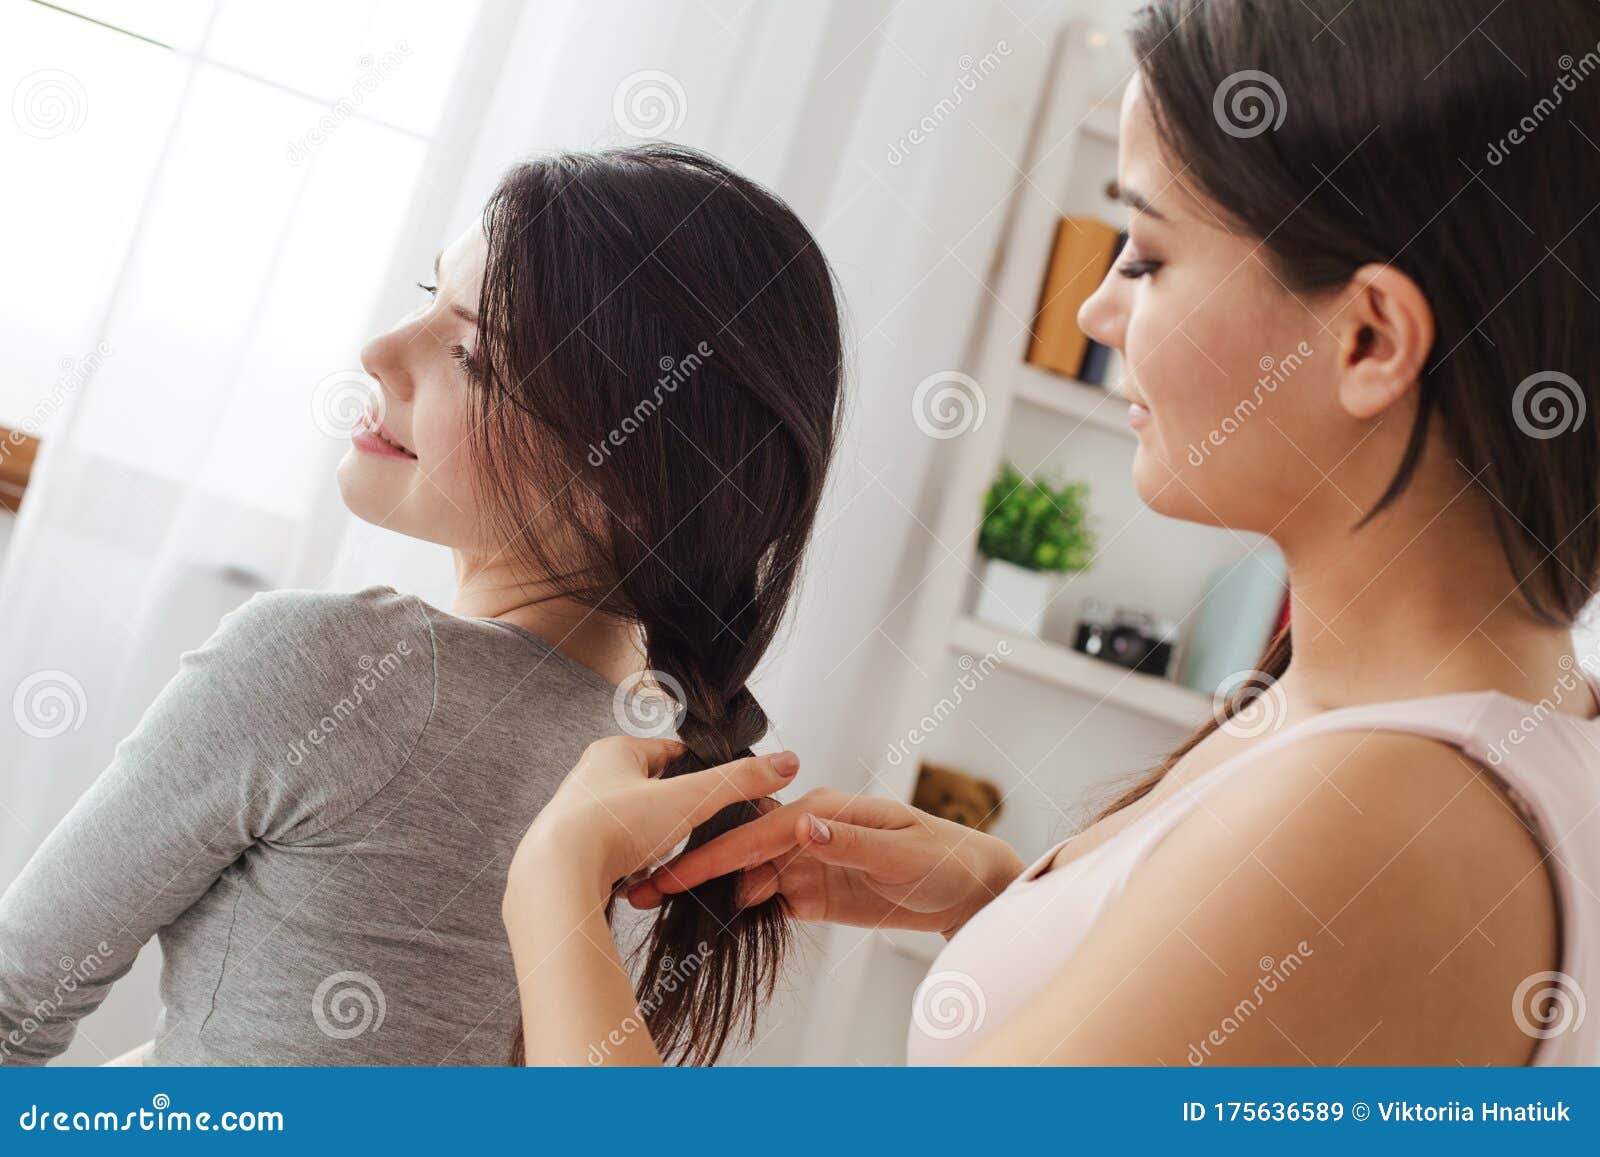 Lesbian Couple In Bedroom At Home Sitting One Woman Making